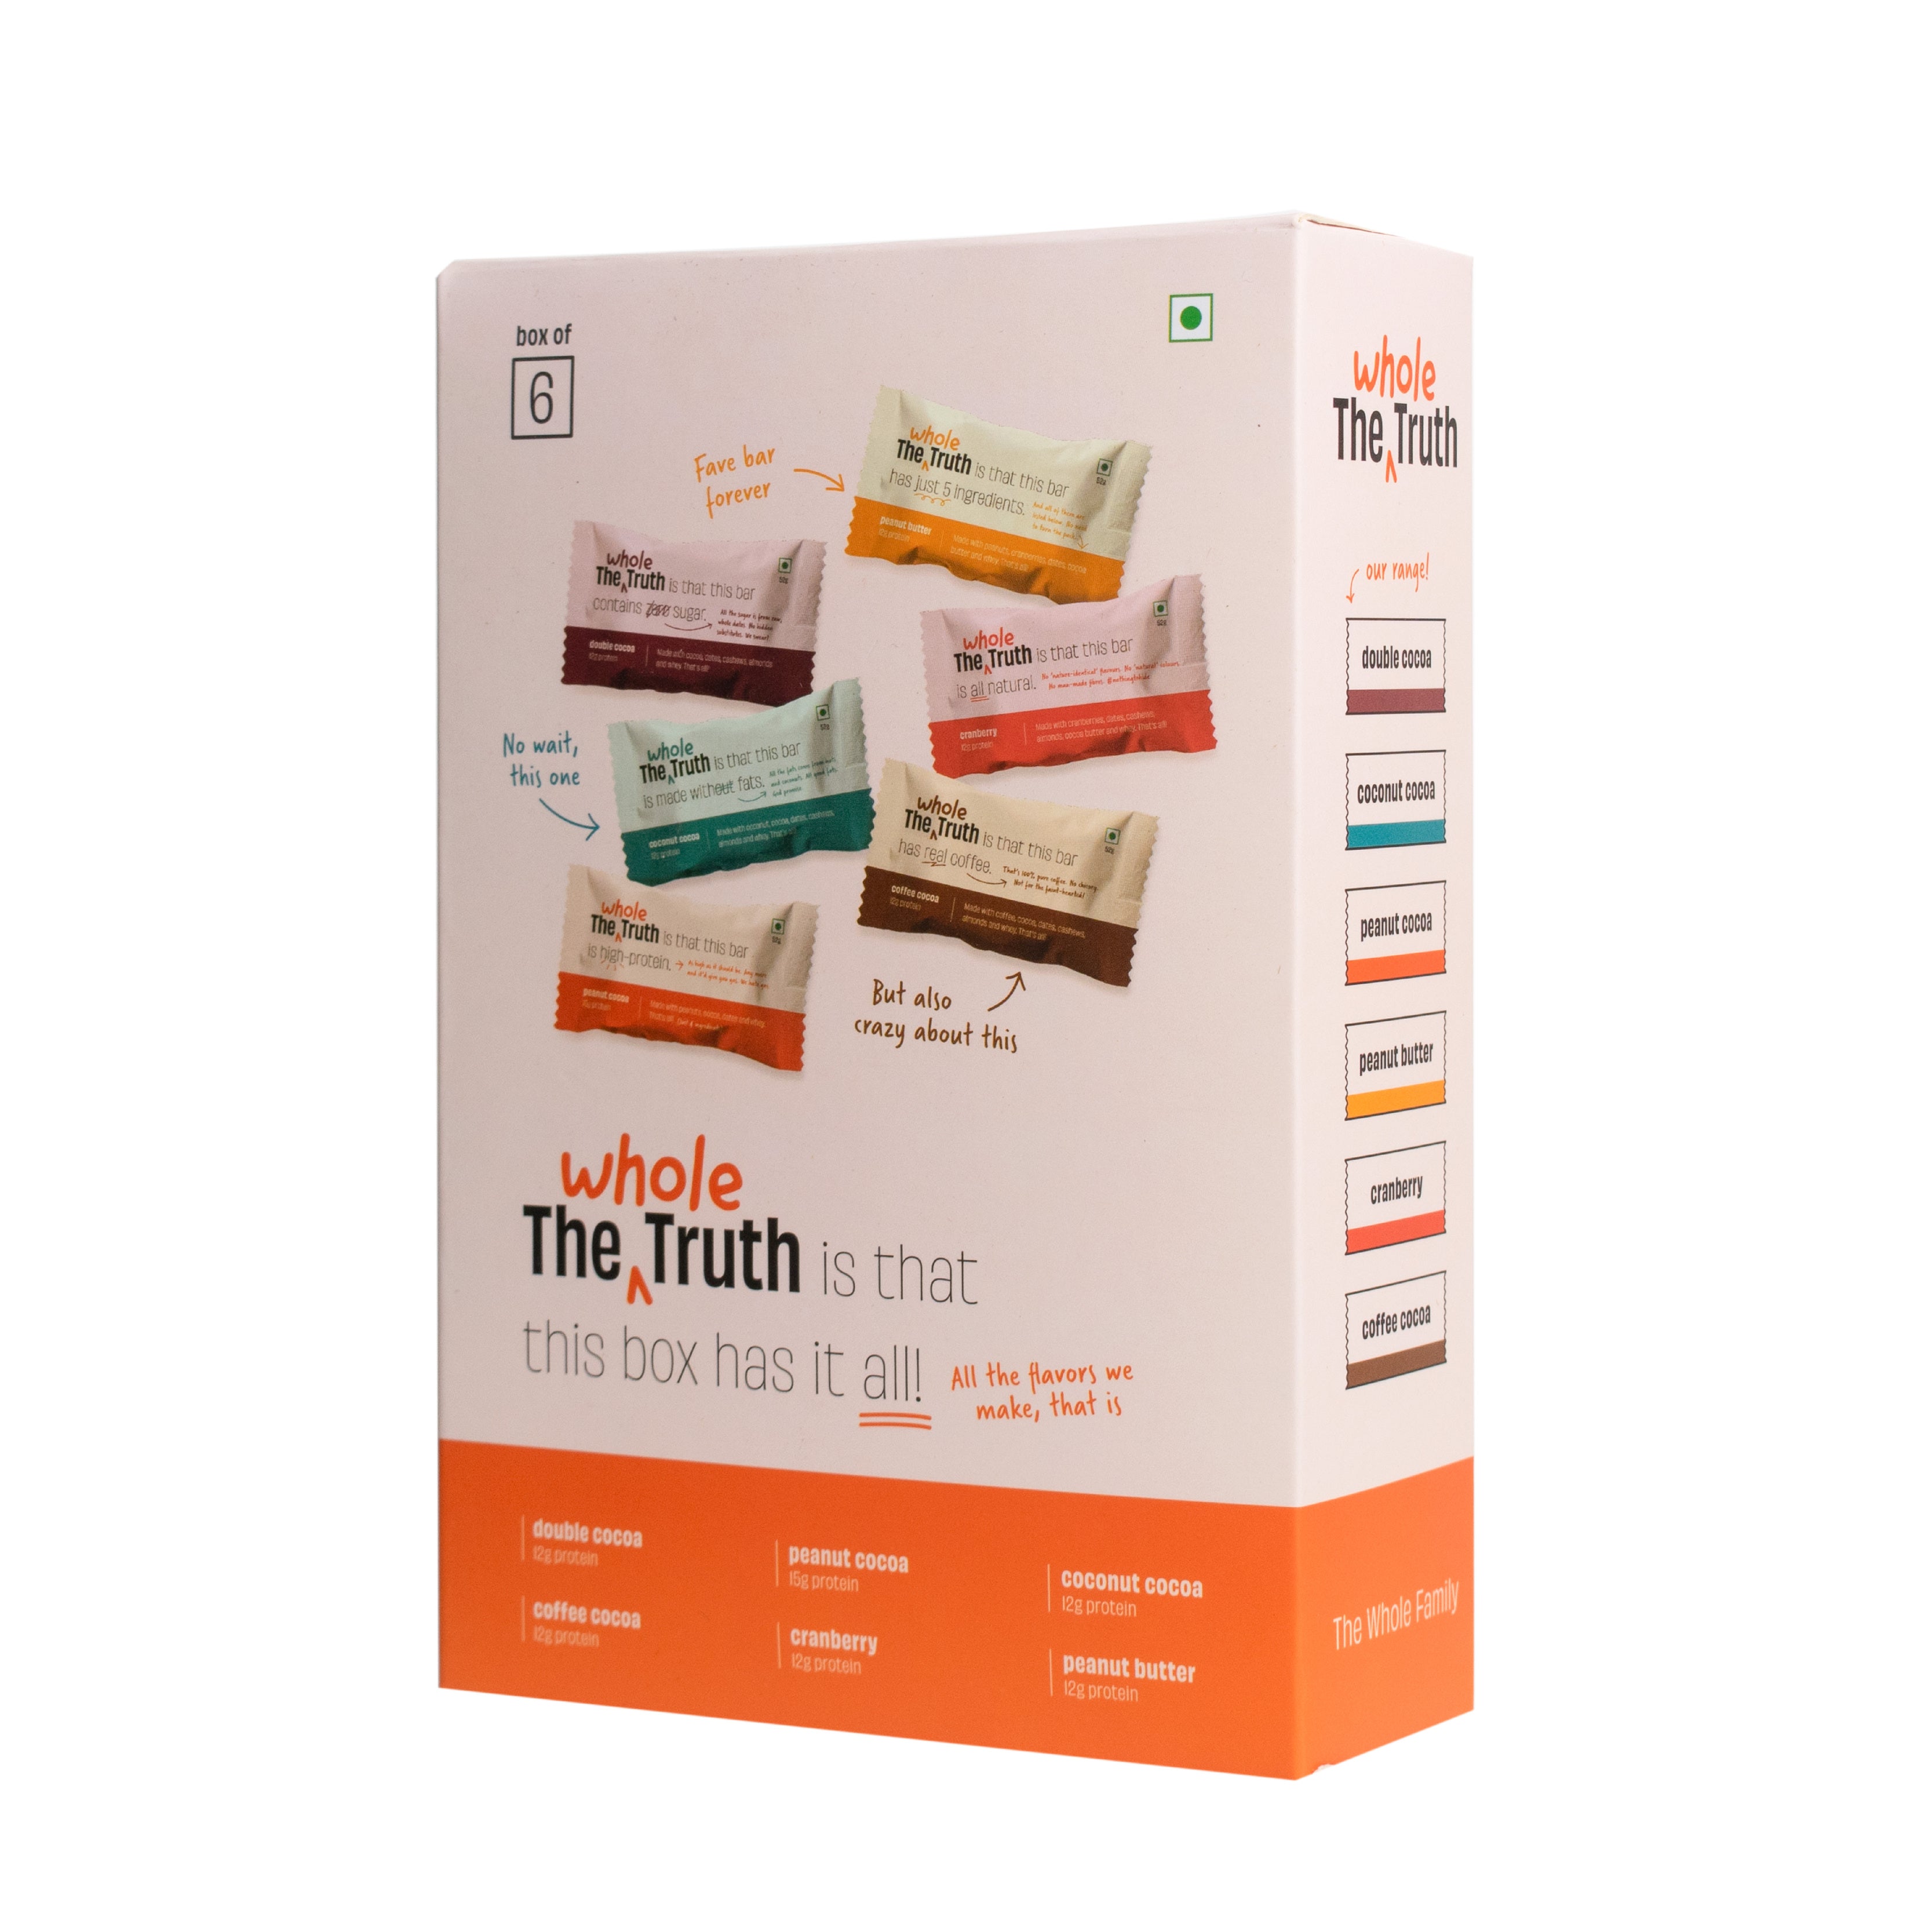 The Whole Truth - Protein Bars - All-In-One - Pack of 6 (6 x 52g) - No Added Sugar - All Natural